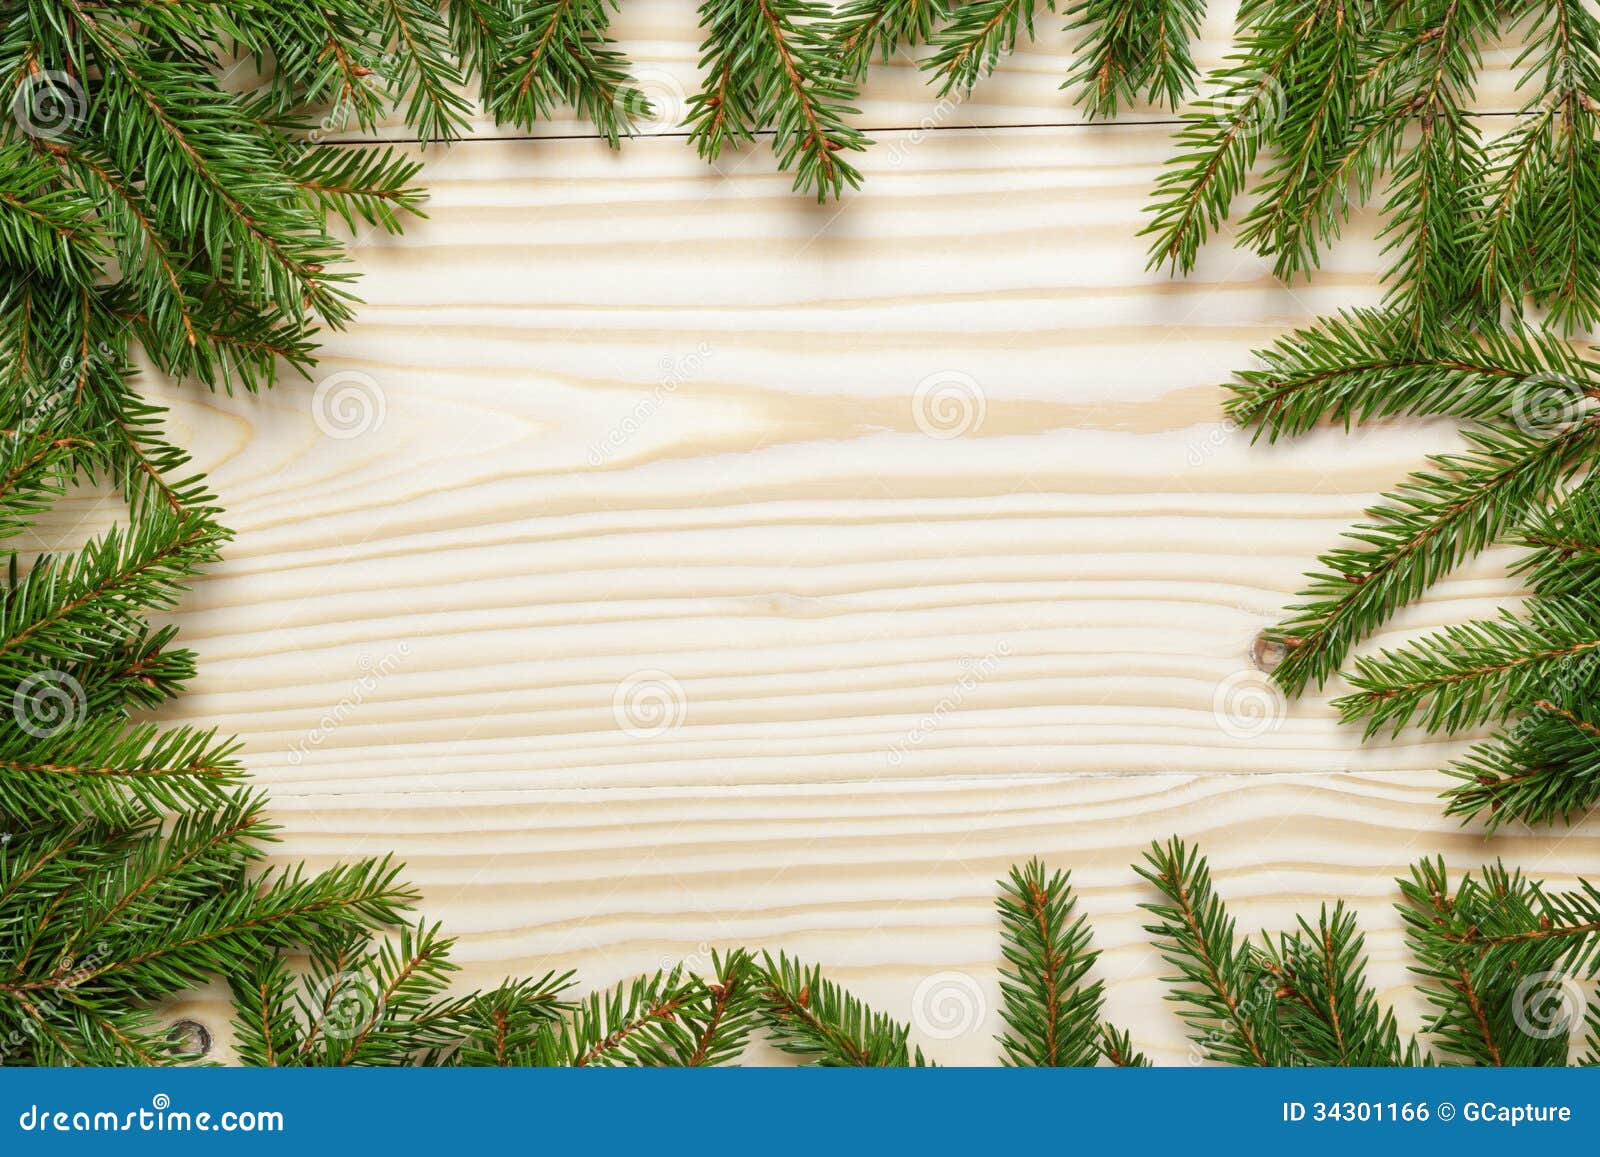 Christmas Background From Fir Twigs On Wooden Table 